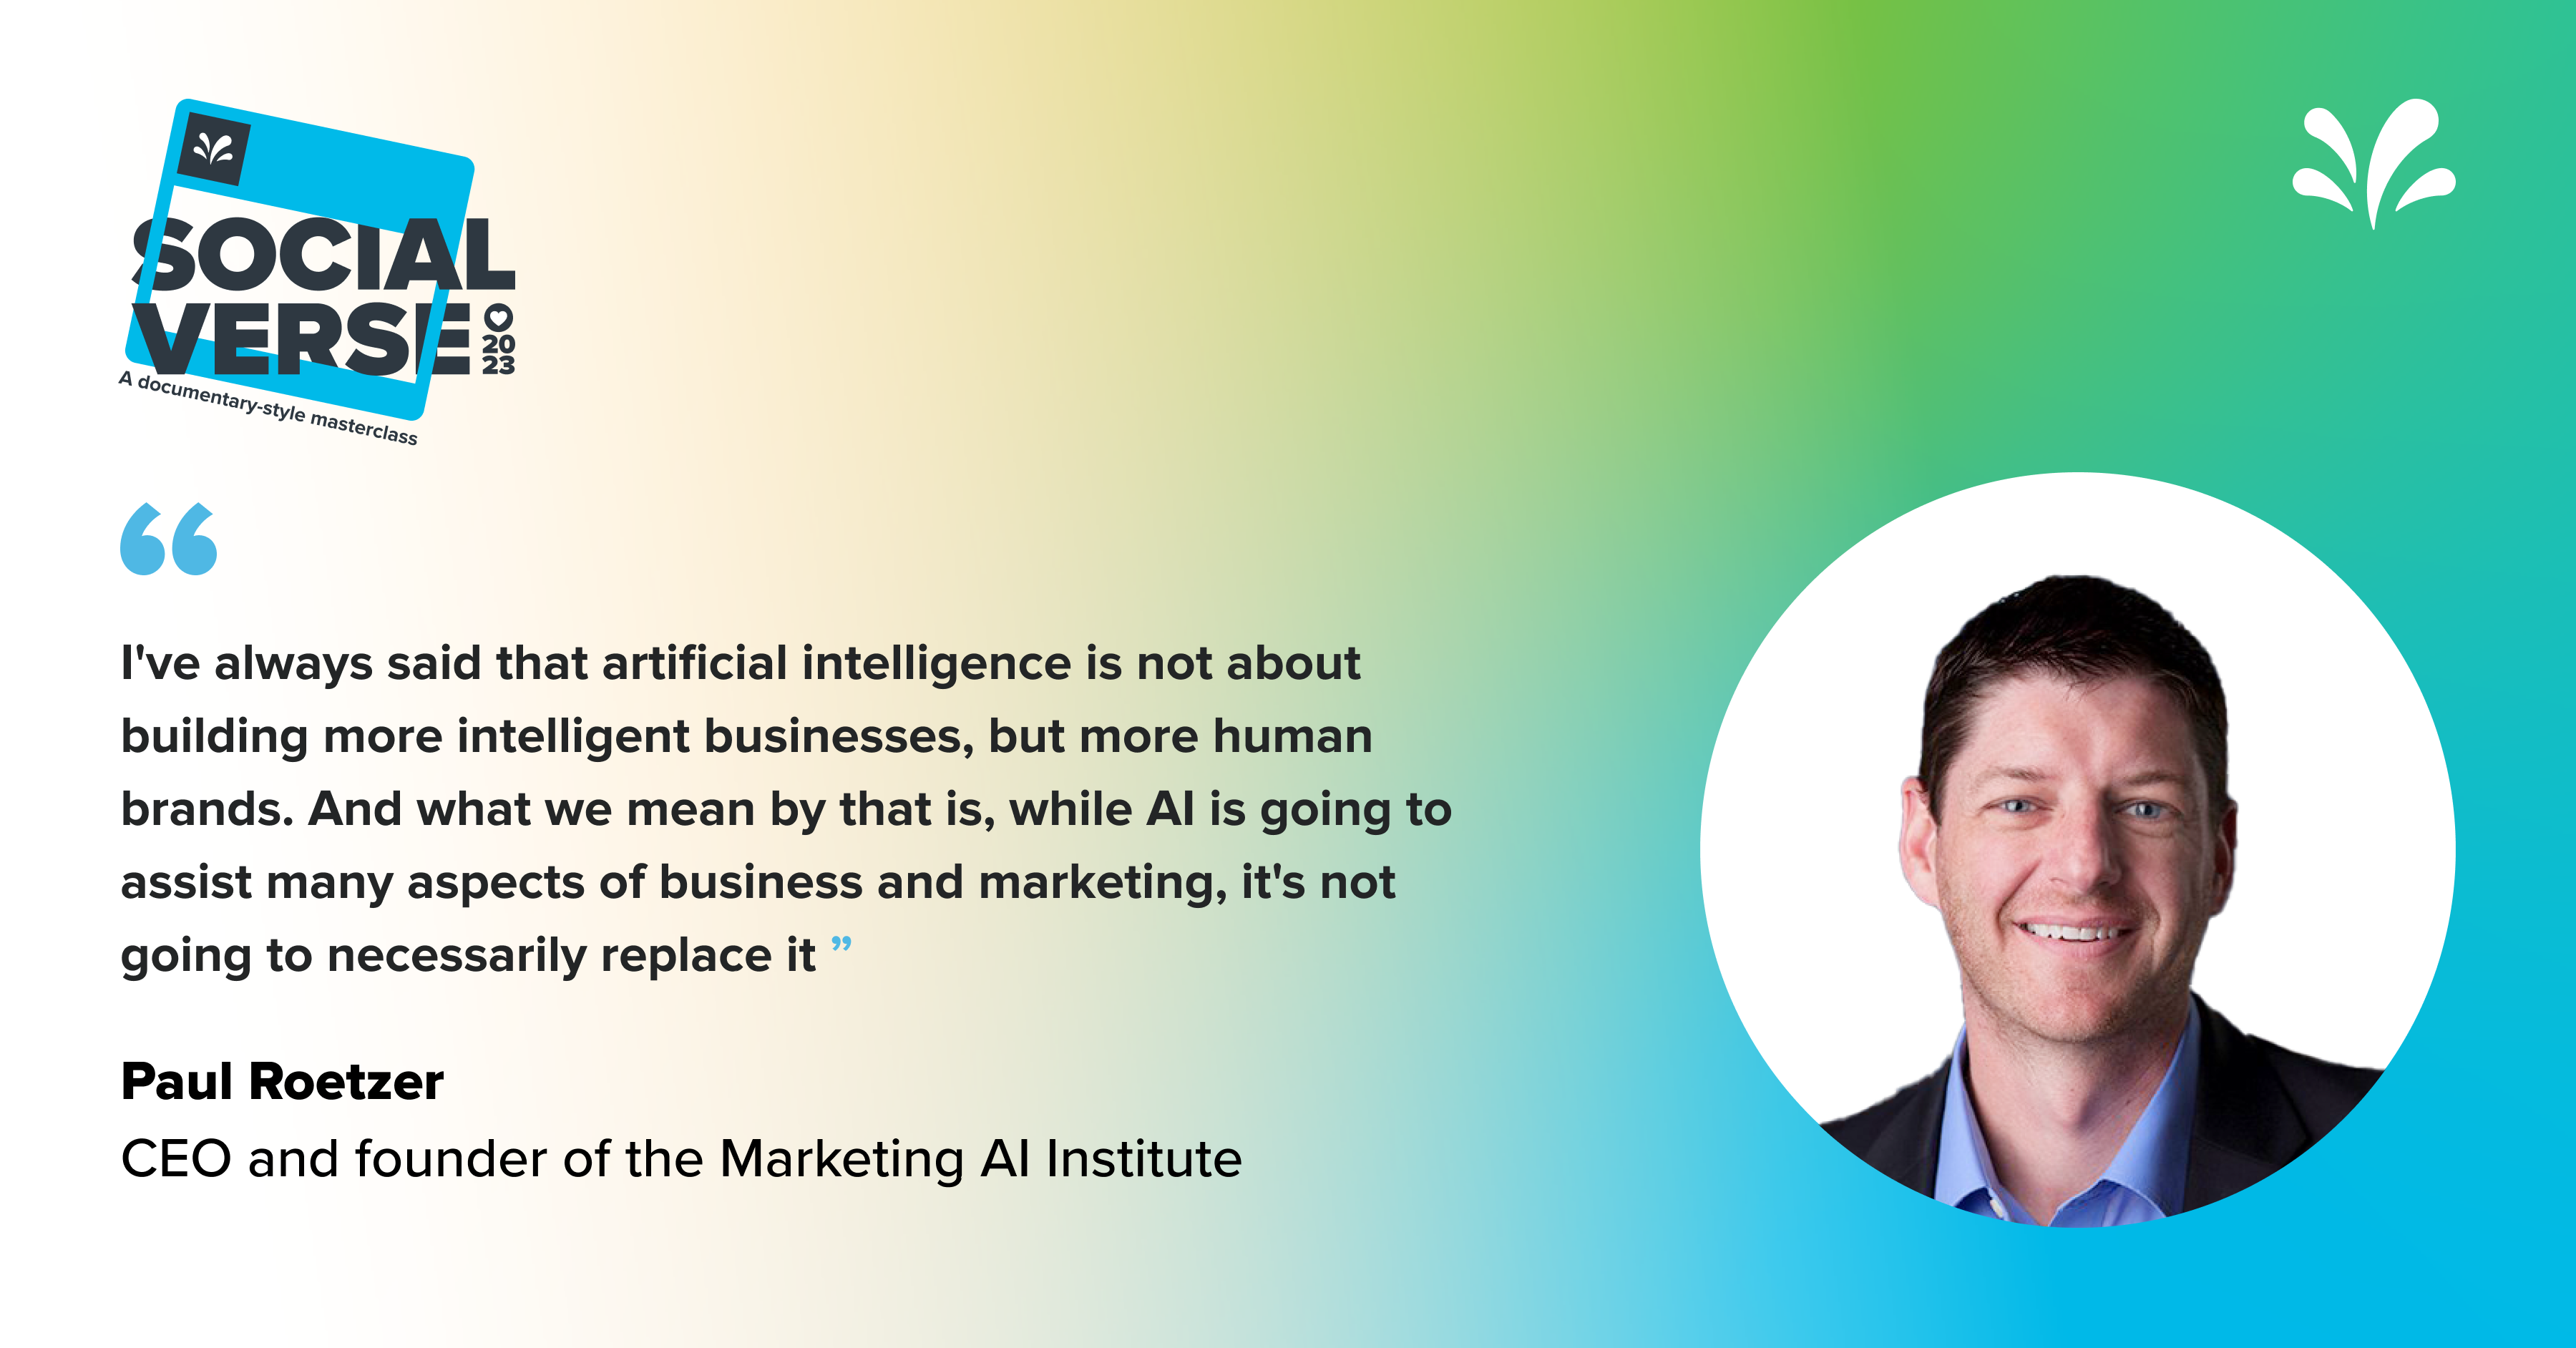 Paul Roetzer, CEO of Marketing AI Institute, emphasizing the role of AI in building more human brands rather than replacing business functions.